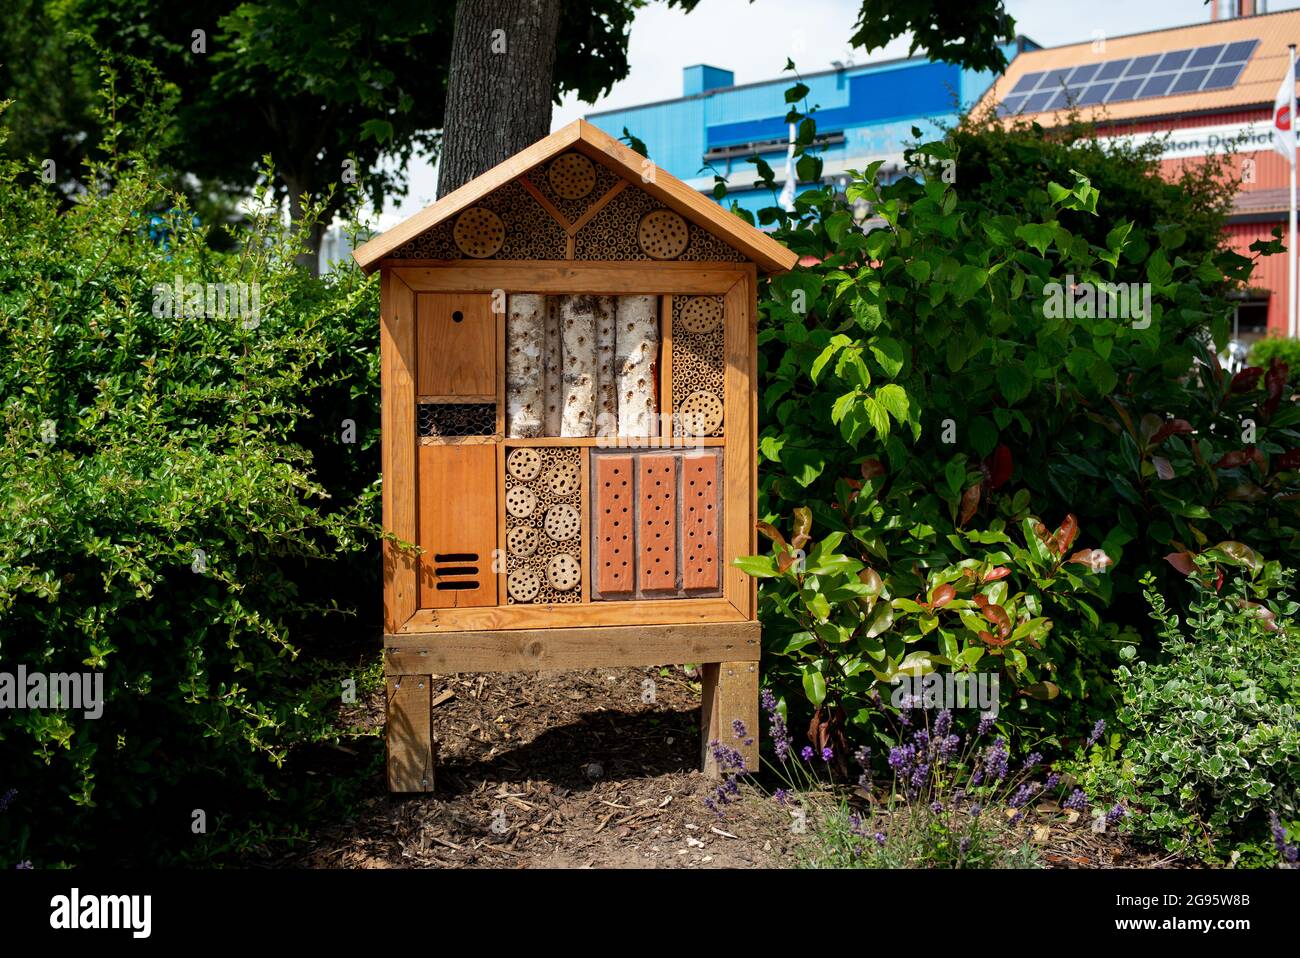 A bee and insect hotel situated in Southampton City Centre to help the environment and local wildlife population. Stock Photo